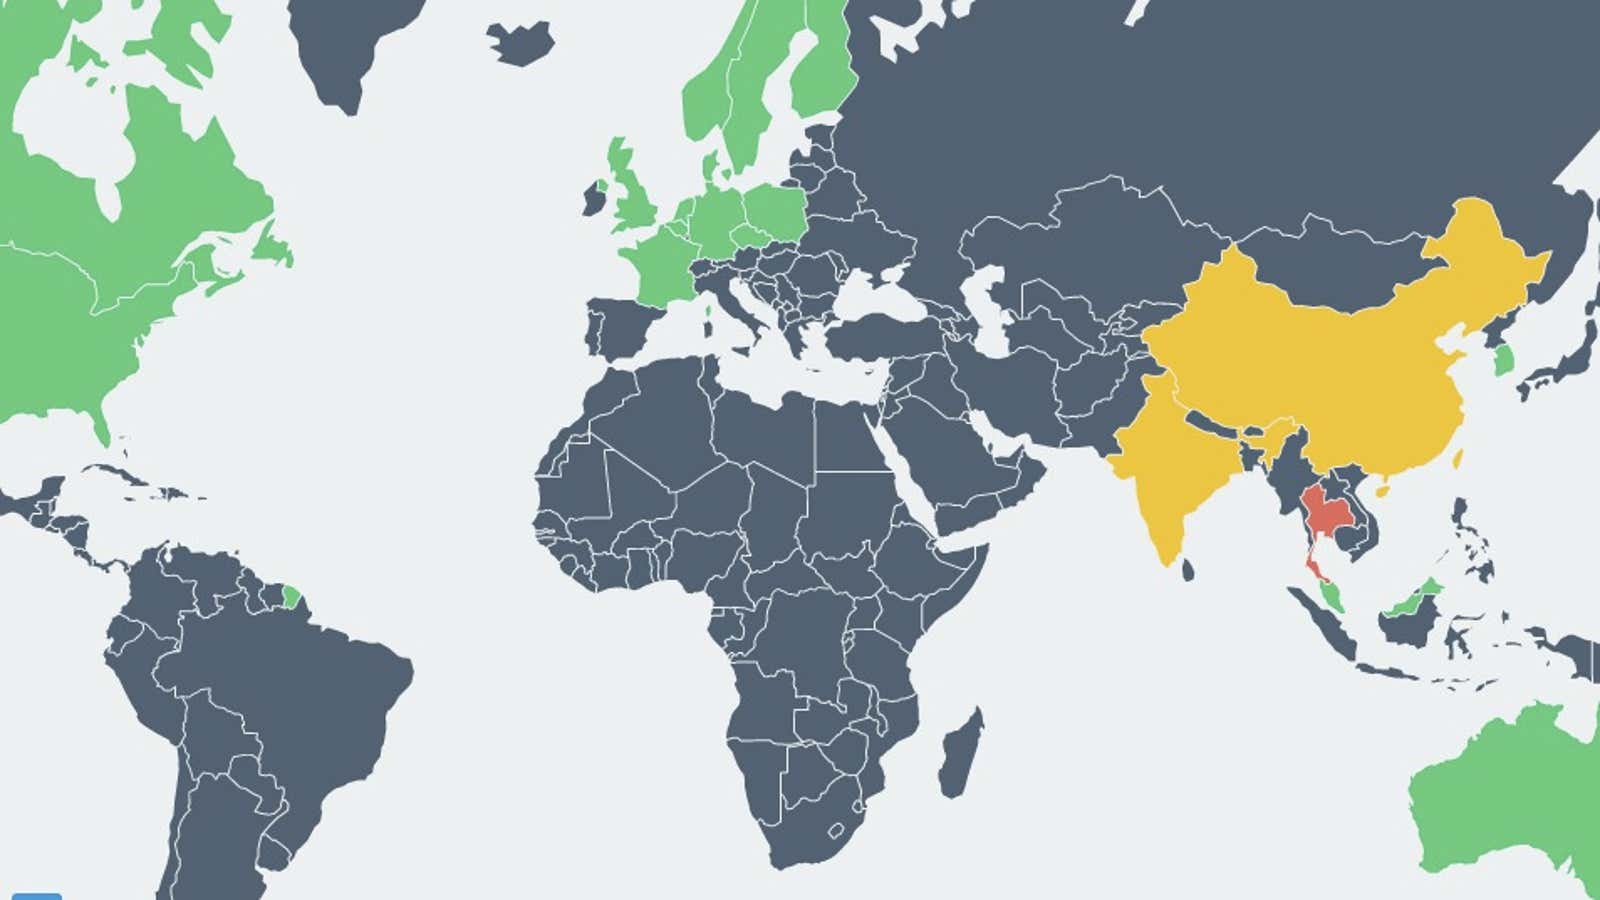 Europe and North America are particularly friendly to bitcoin, for now.